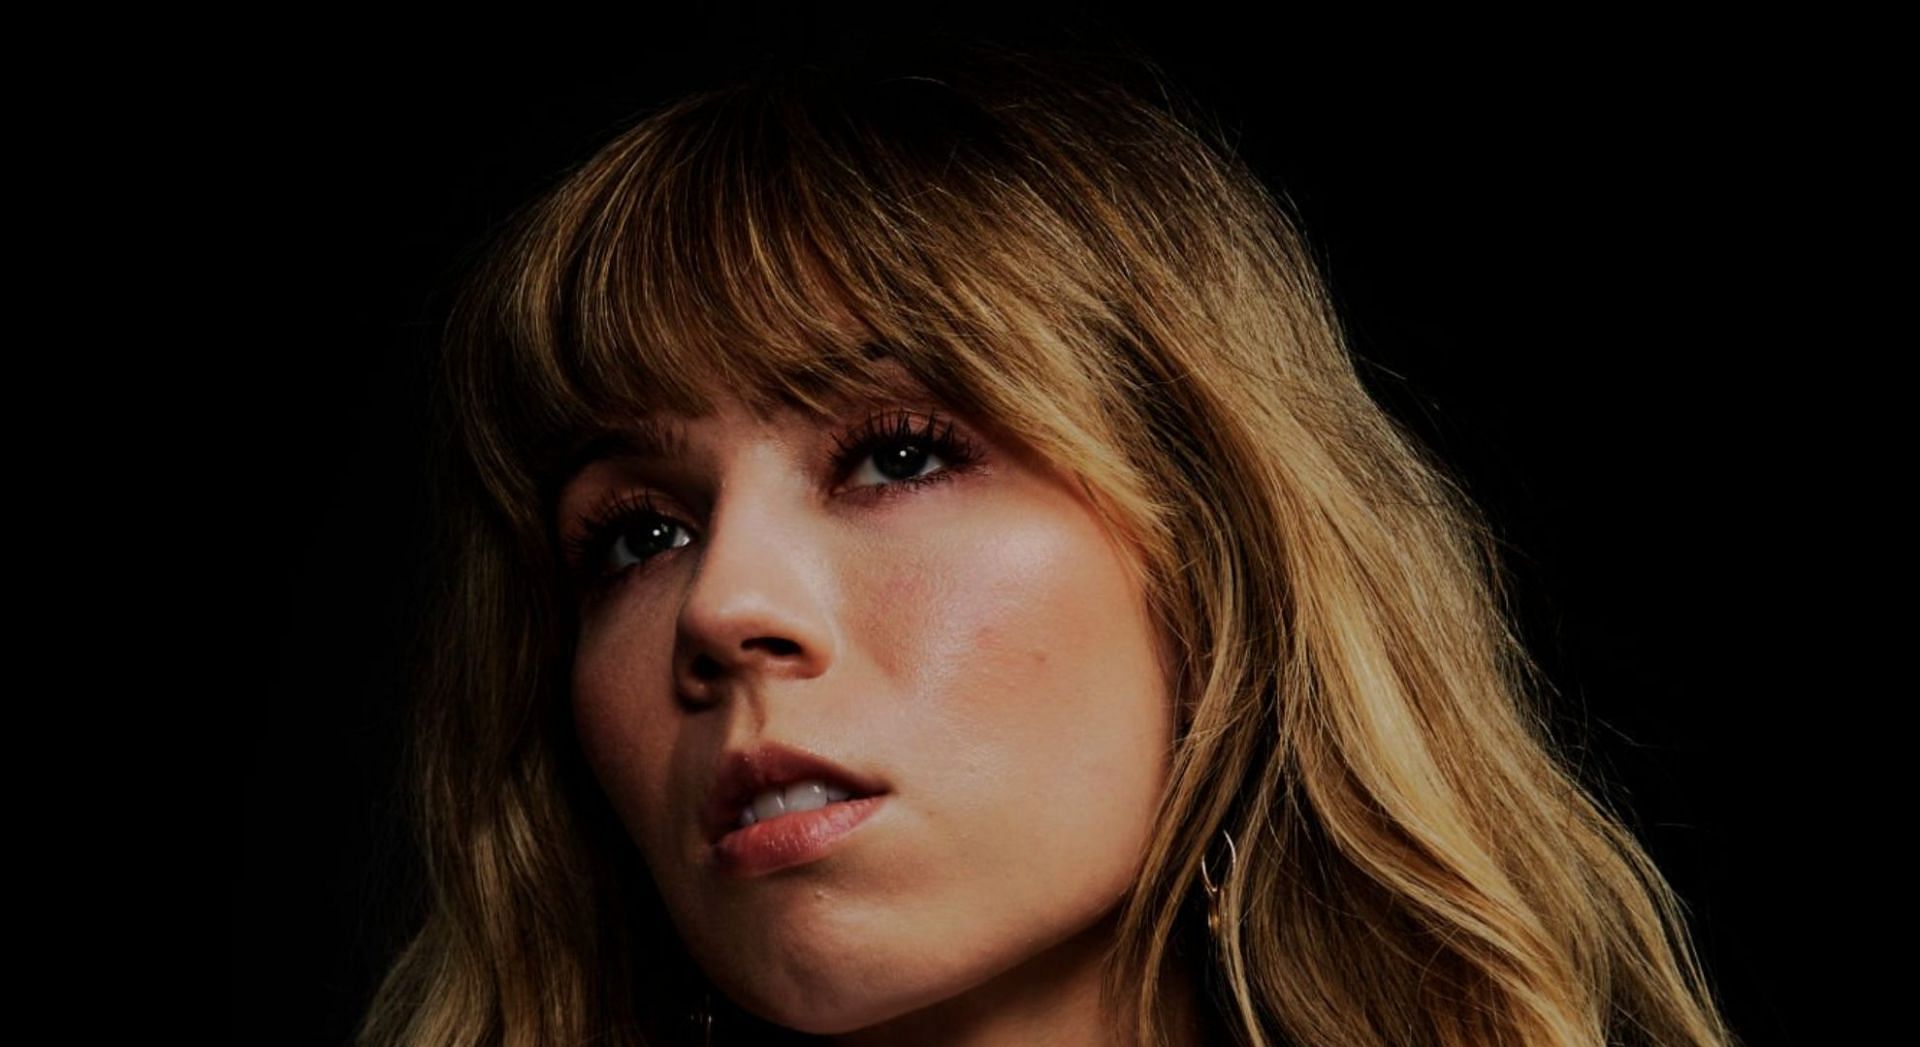 Jennette McCurdy is set to publish her tell-all memoir highlighting the challenges she faced as a child actor (Image via Philip Cheung/Getty Images)